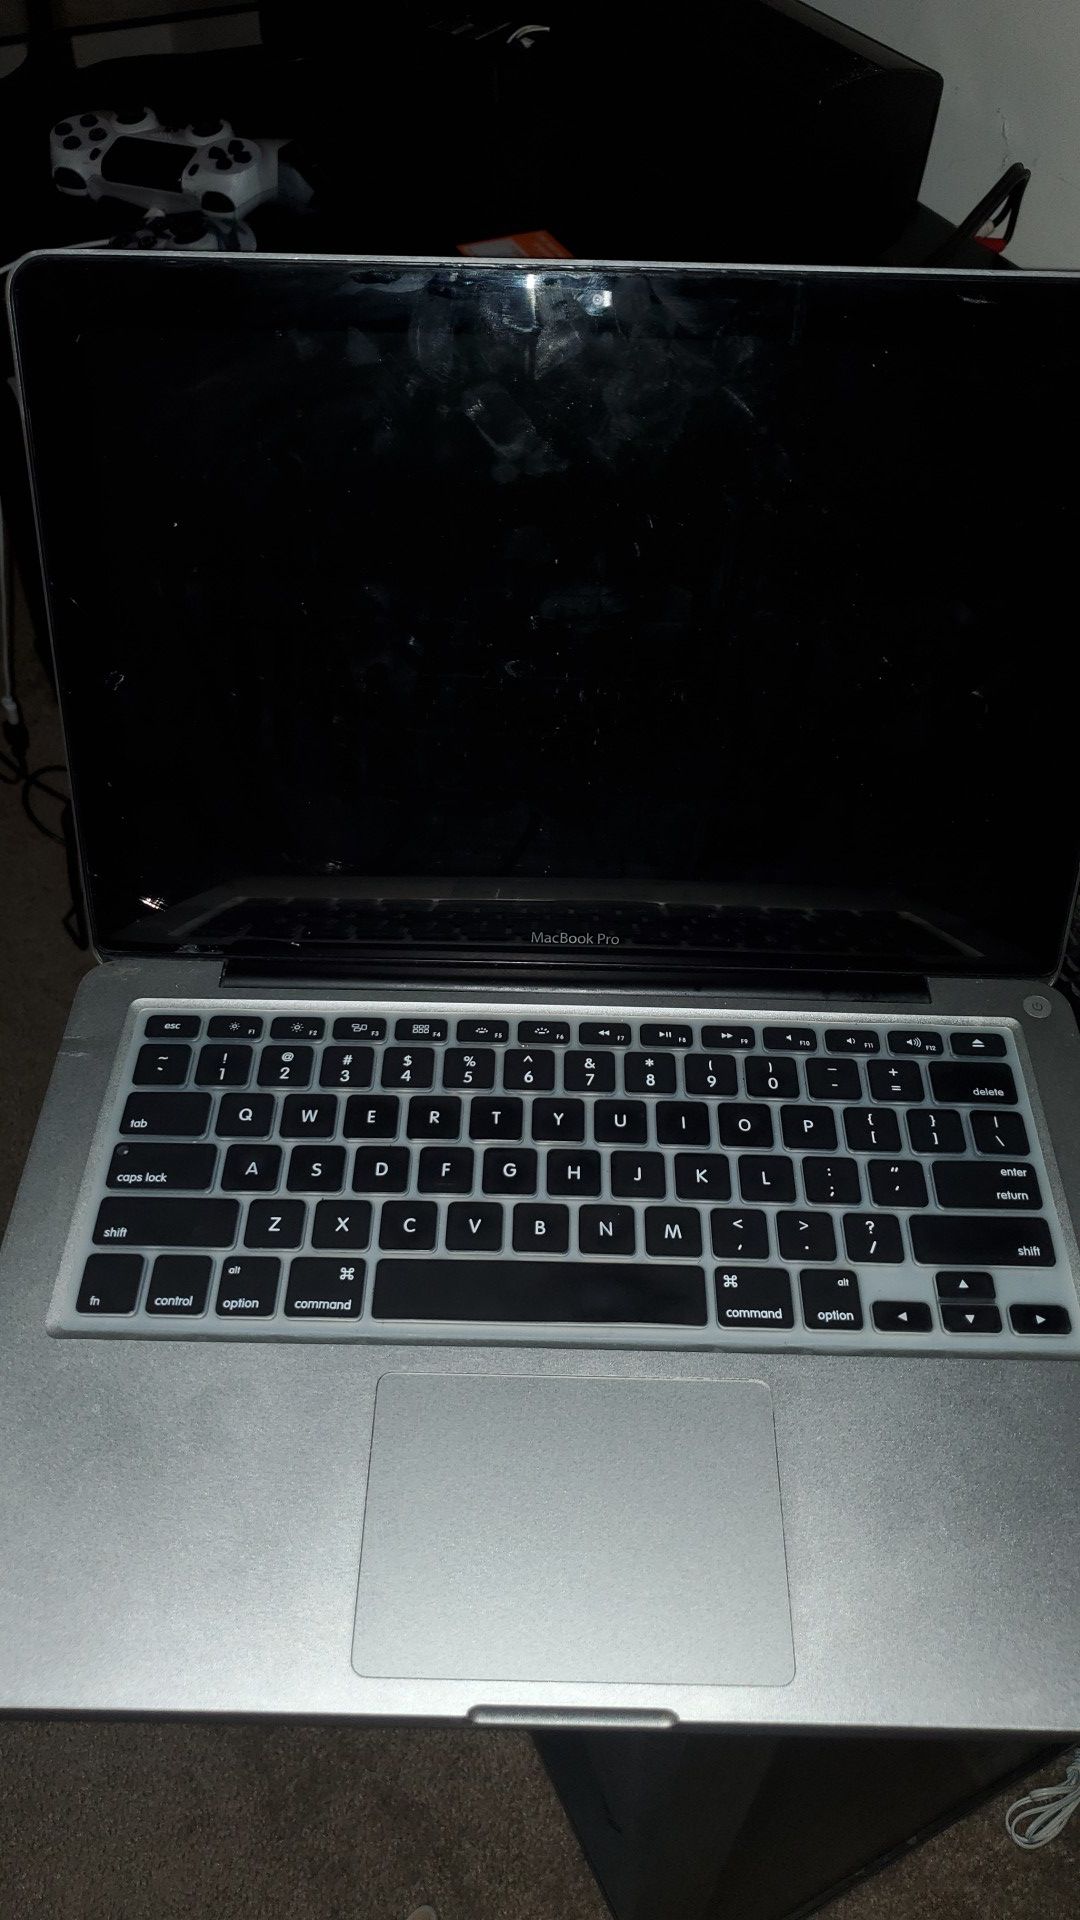 Macbook pro 2013 $400 it's has a small crack on the corner, but it didn't affect the screen